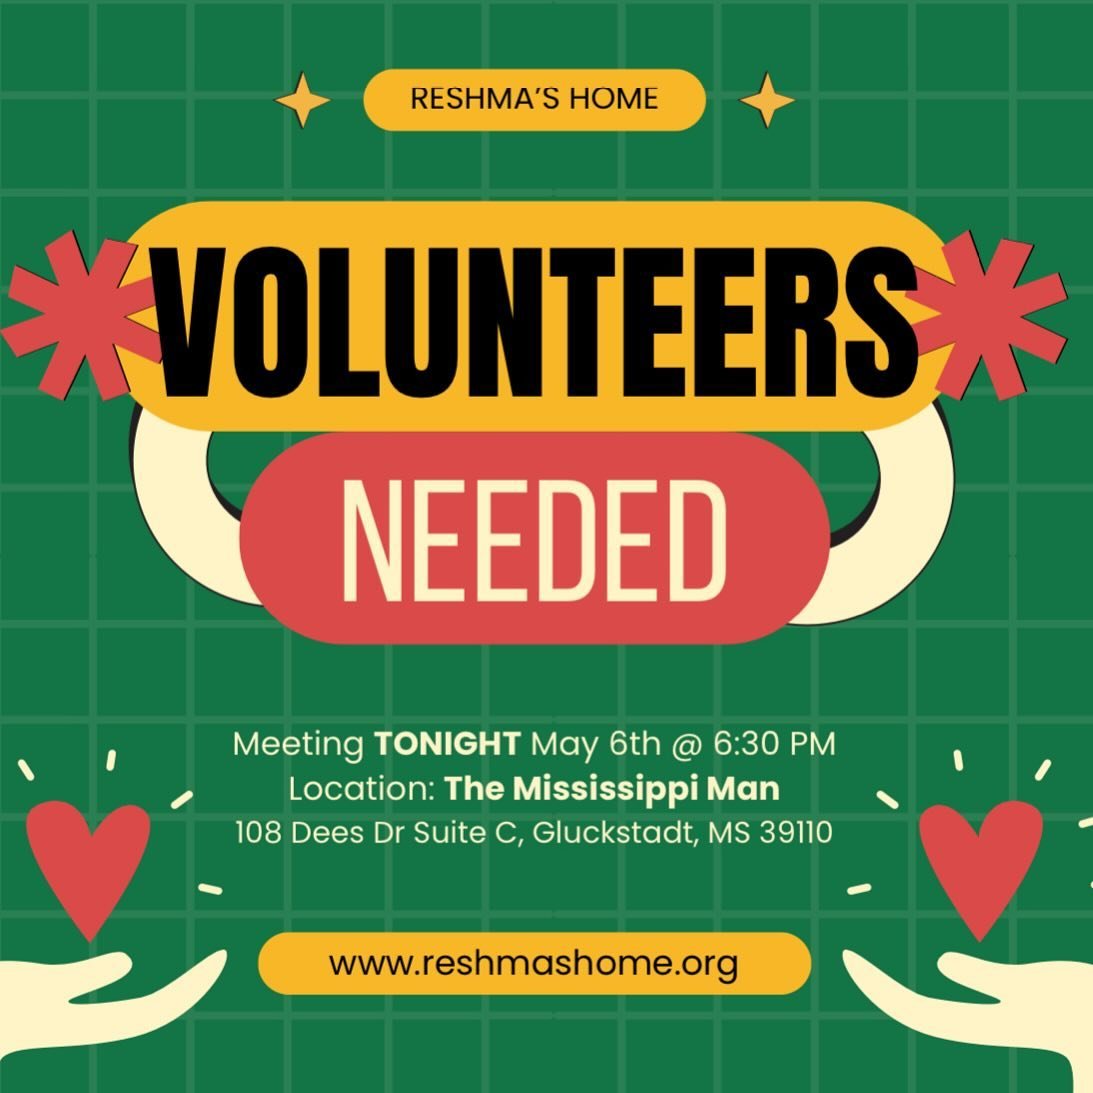 REMINDER: volunteer meeting for those who want to serve during the 5K Run / Walk is TONIGHT AT 6:30PM!